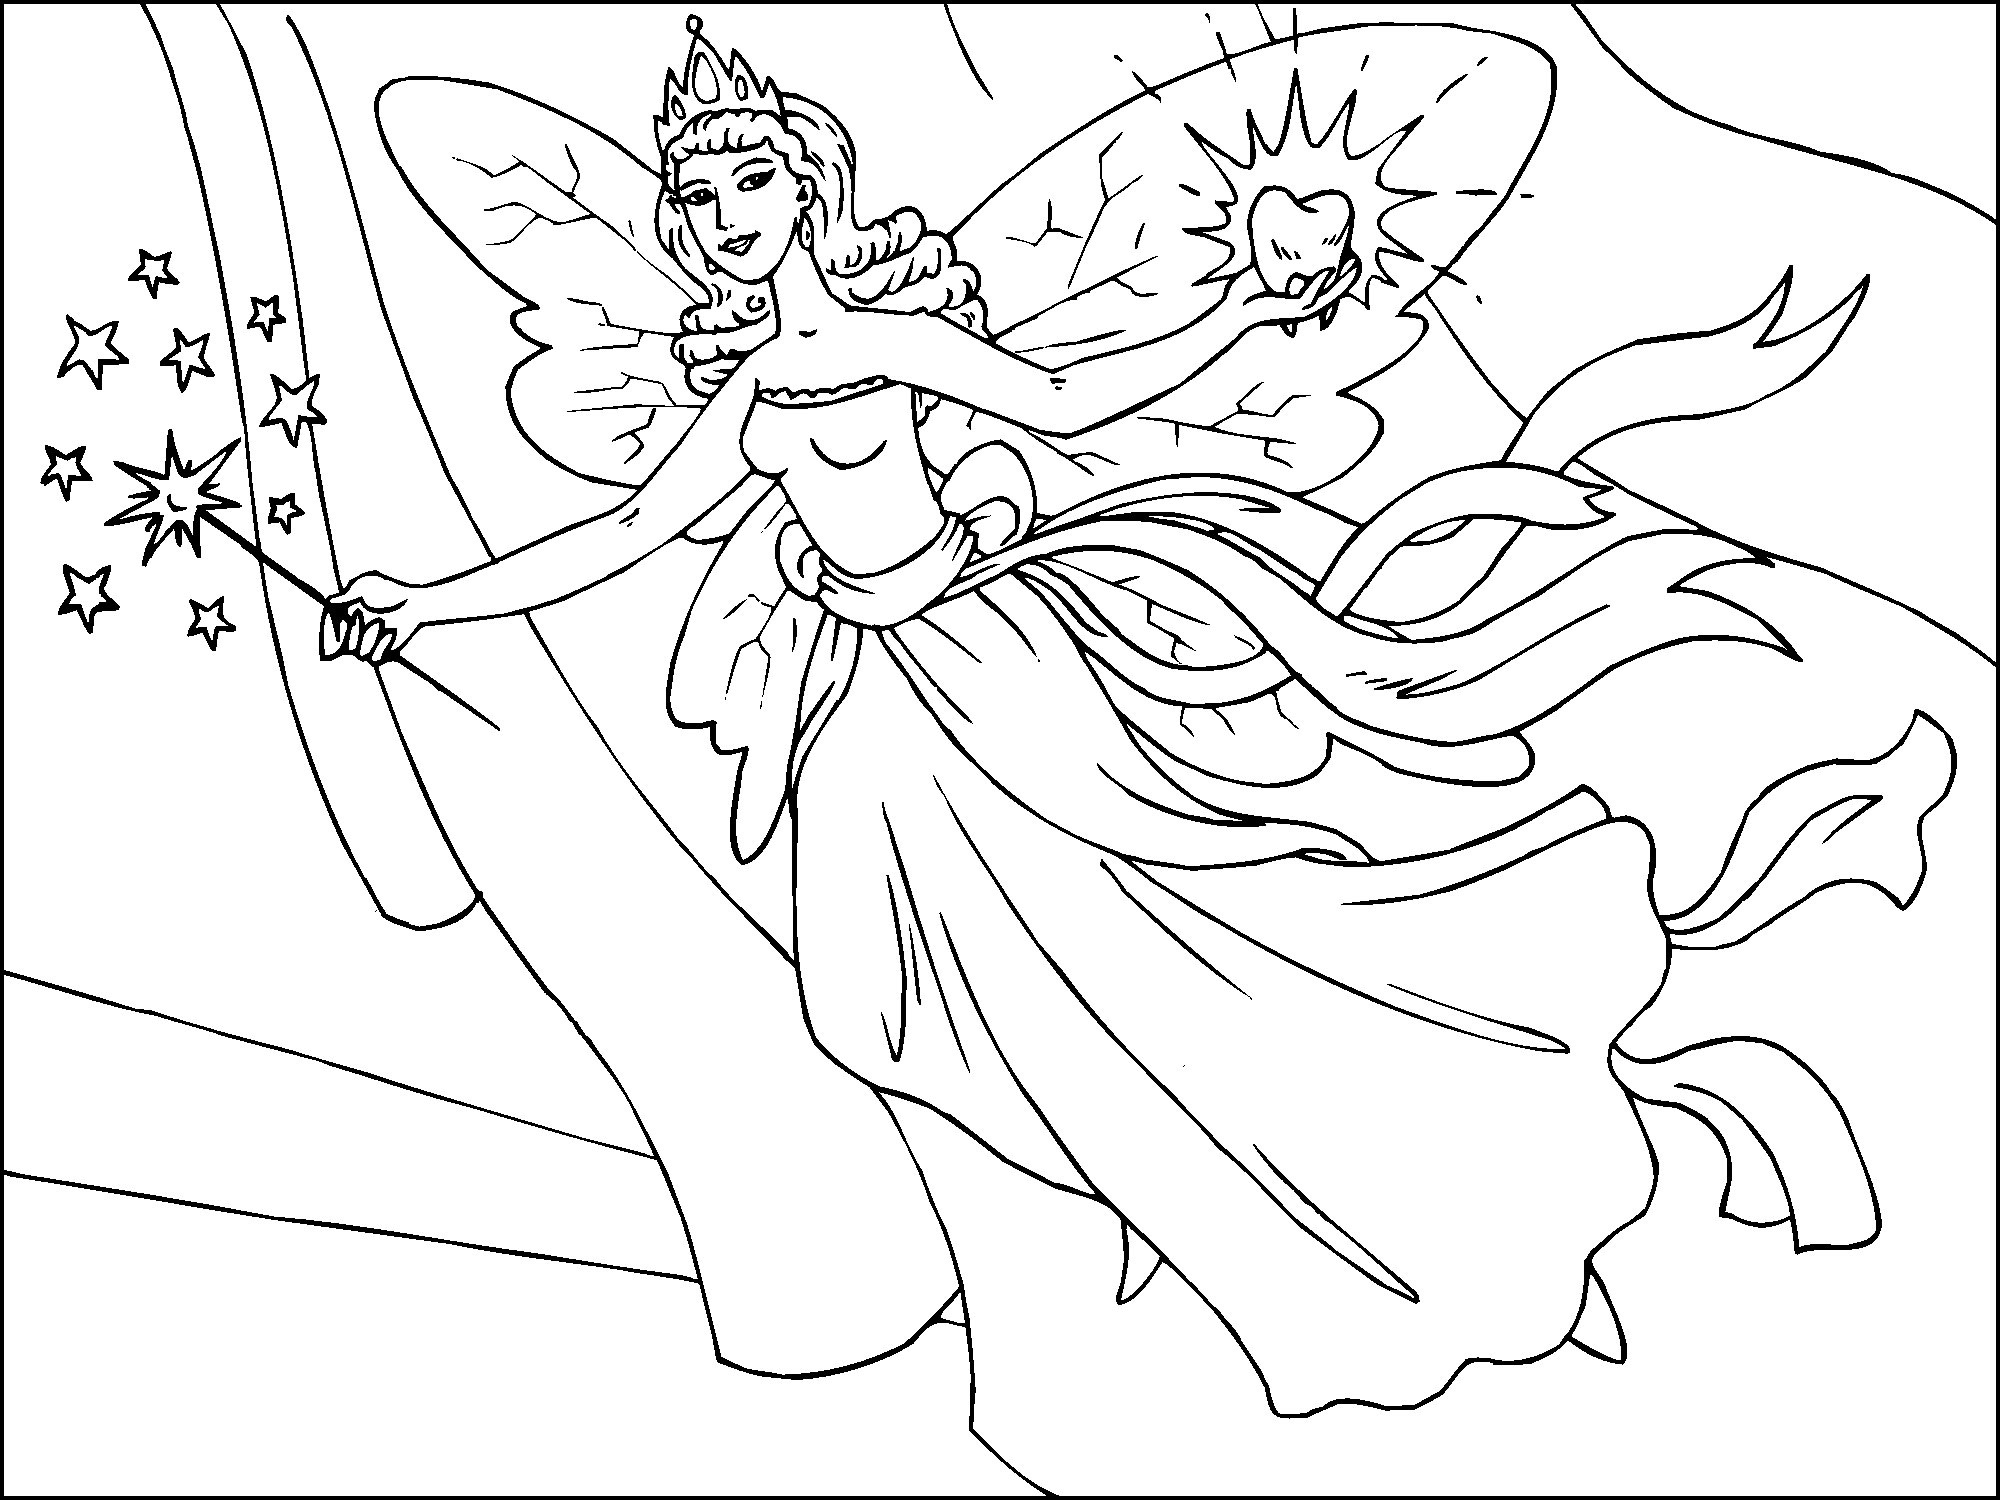 princess-fairy-coloring-pages-printable-4-years-ago-13747-views